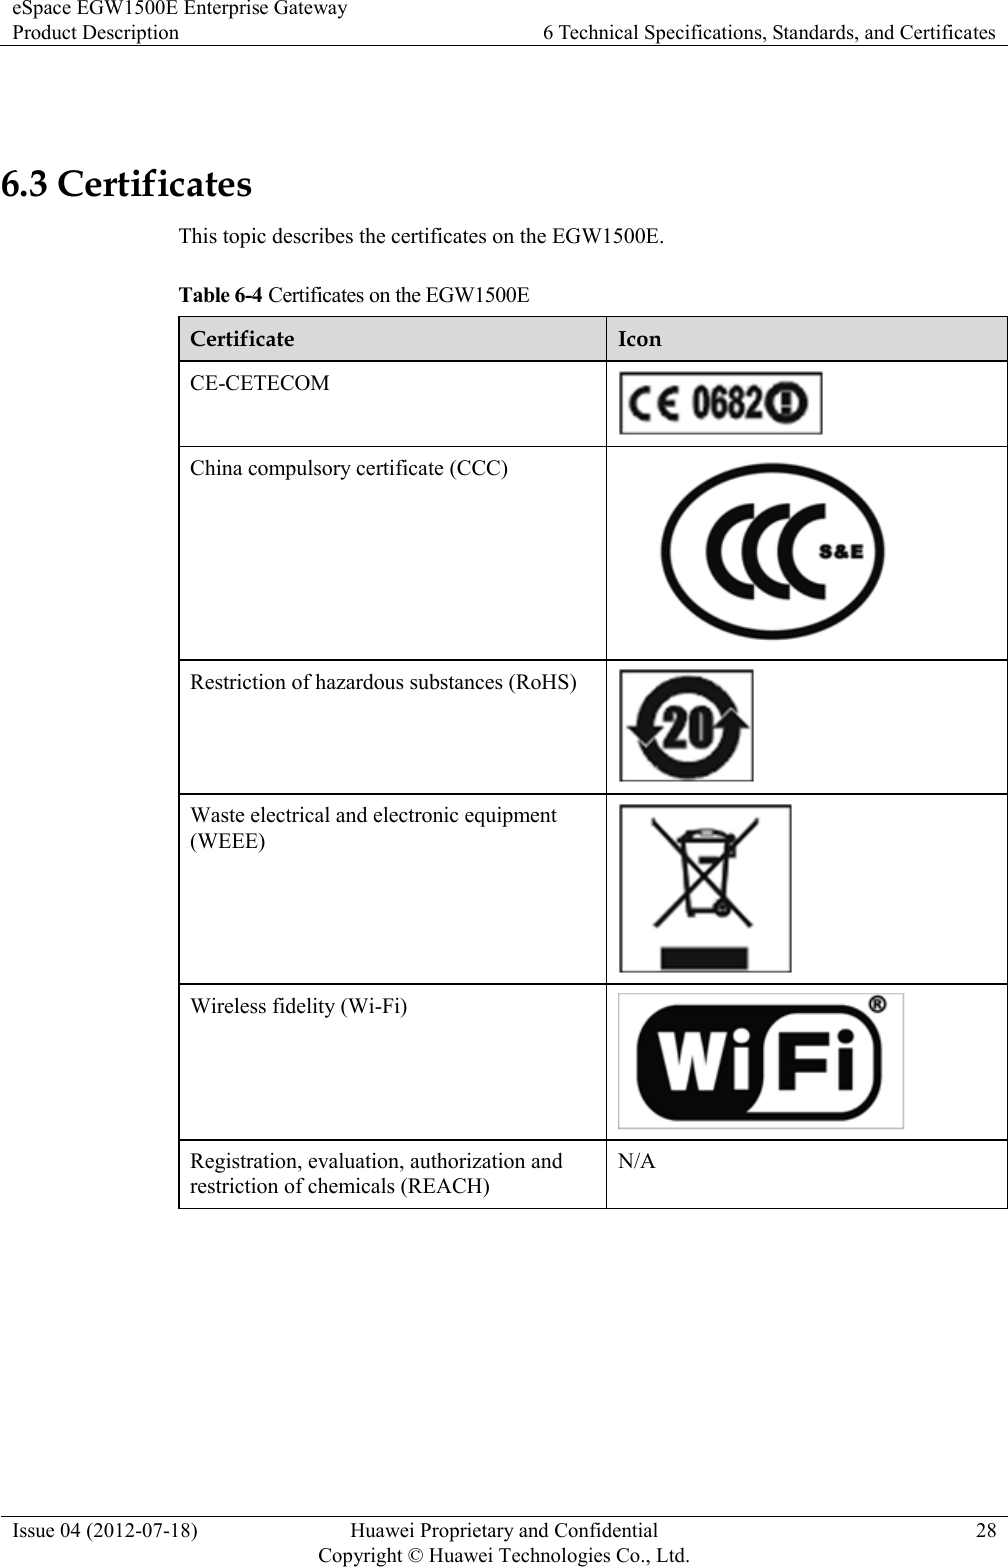 eSpace EGW1500E Enterprise Gateway Product Description 6 Technical Specifications, Standards, and Certificates  Issue 04 (2012-07-18) Huawei Proprietary and Confidential                                     Copyright © Huawei Technologies Co., Ltd. 28   6.3 Certificates This topic describes the certificates on the EGW1500E. Table 6-4 Certificates on the EGW1500E Certificate Icon CE-CETECOM  China compulsory certificate (CCC)  Restriction of hazardous substances (RoHS)  Waste electrical and electronic equipment (WEEE)  Wireless fidelity (Wi-Fi)  Registration, evaluation, authorization and restriction of chemicals (REACH) N/A 